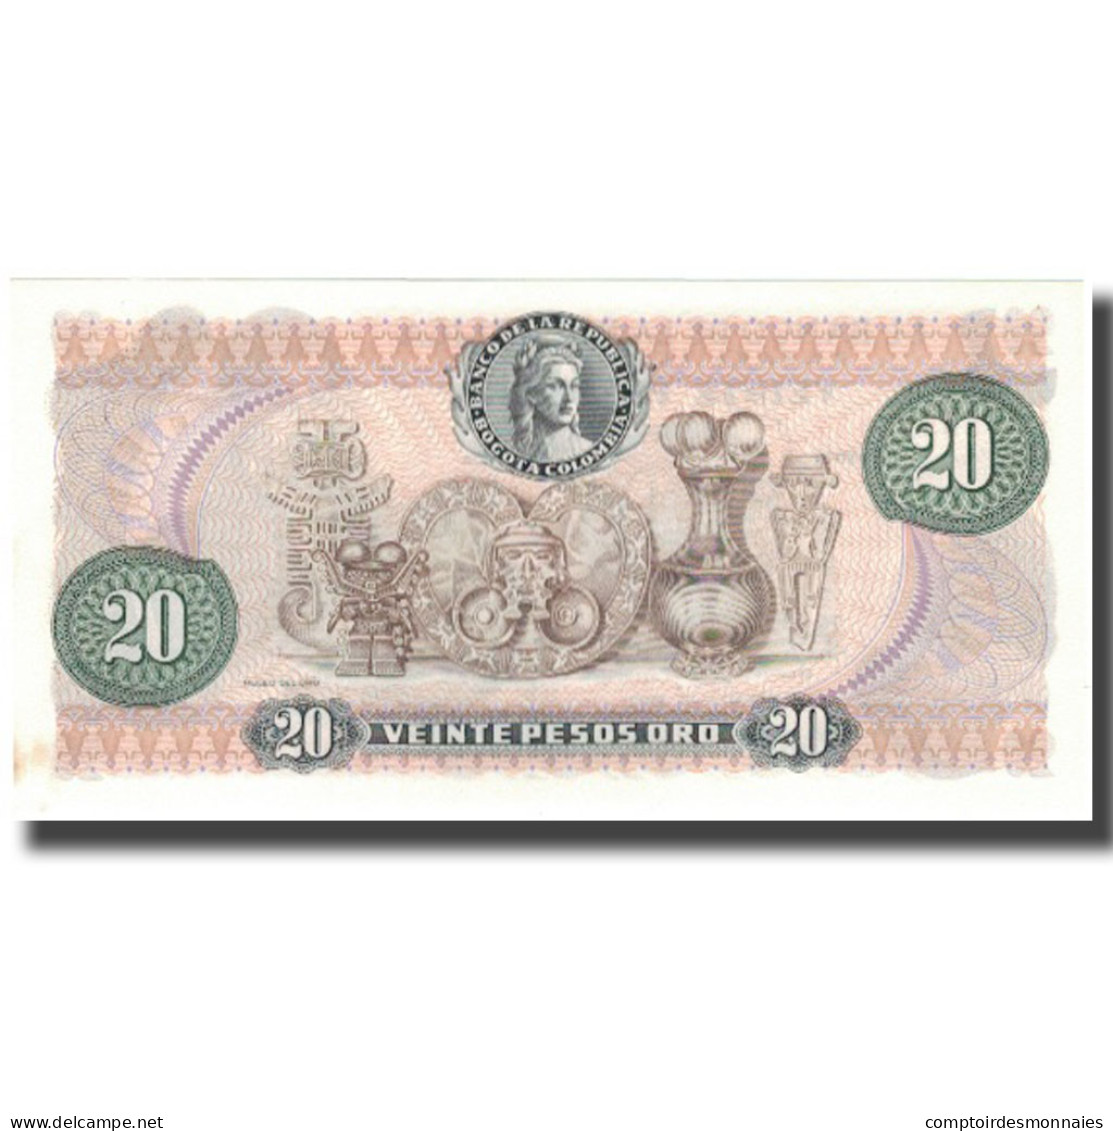 Billet, Colombie, 20 Pesos Oro, 1982-01-01, KM:409d, NEUF - Colombia